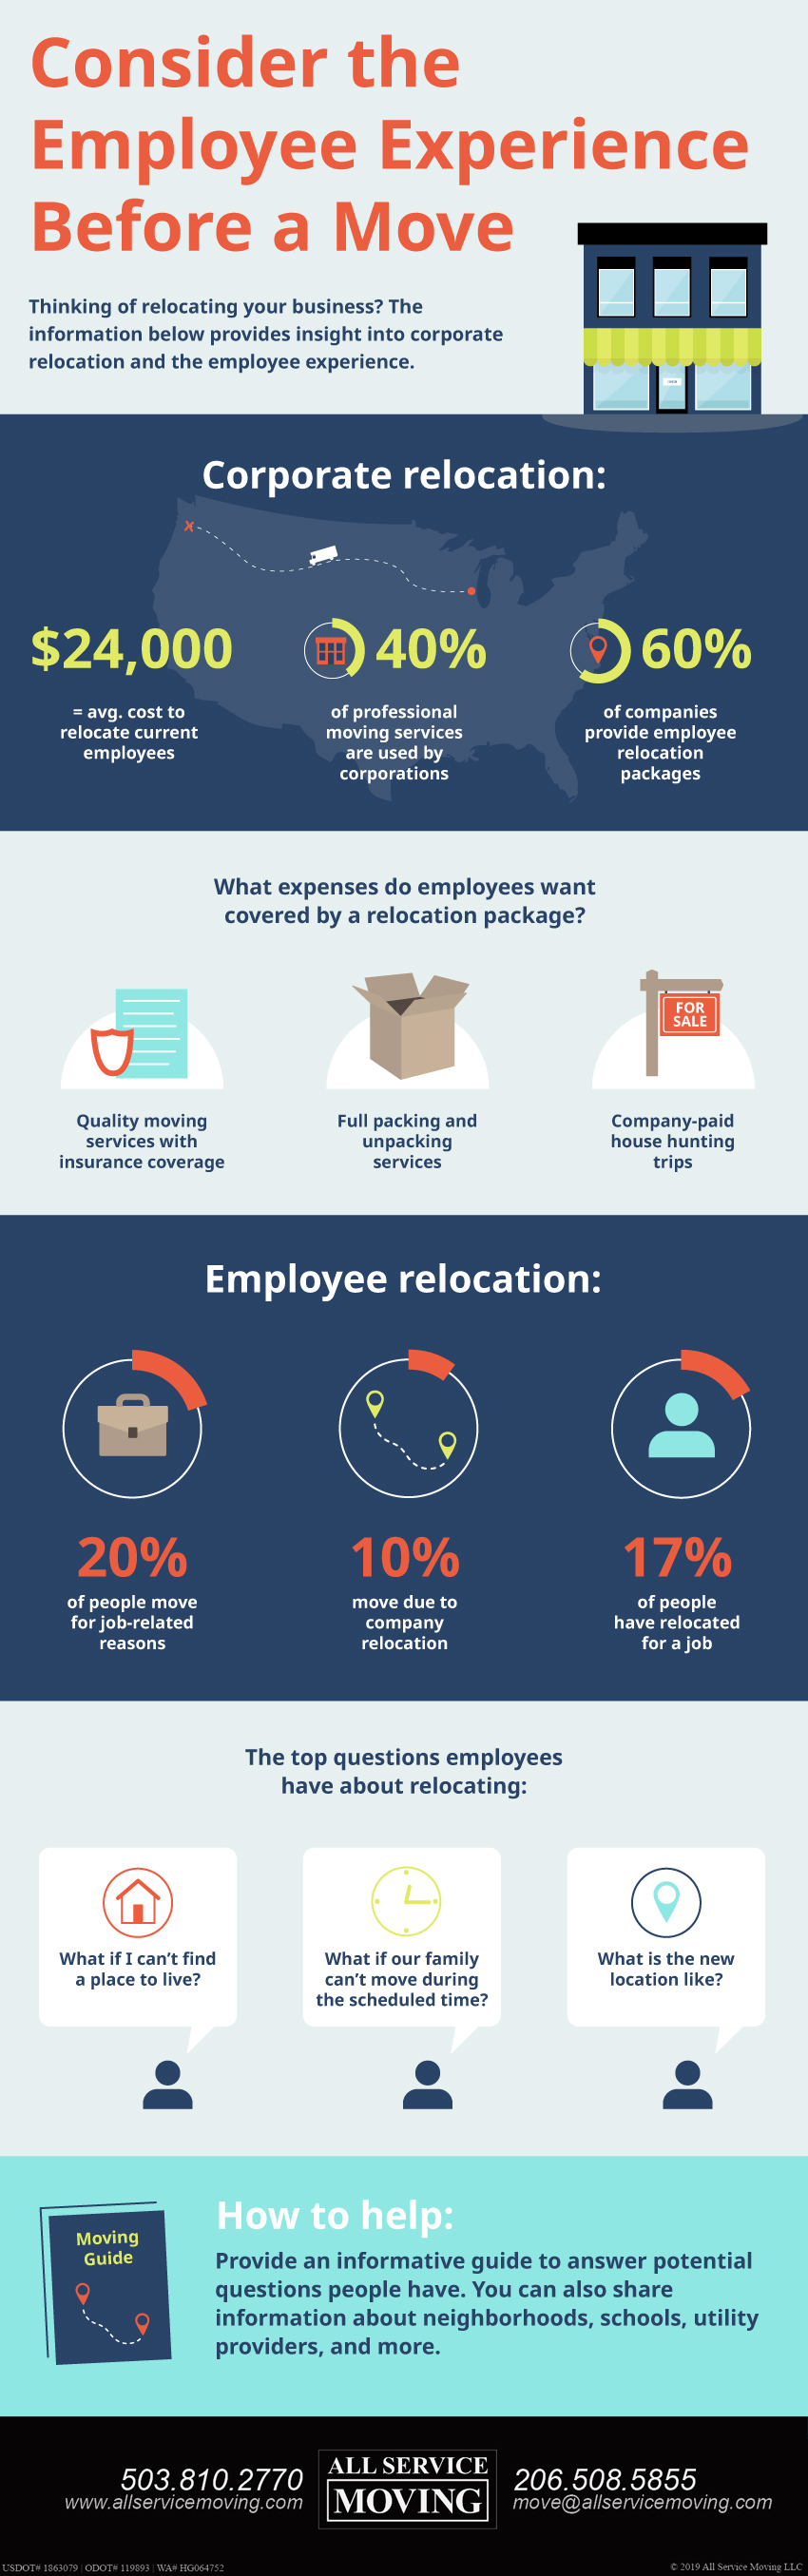 All-Service-Moving-Consider-the-Employee-Experience-Before-a-Move 